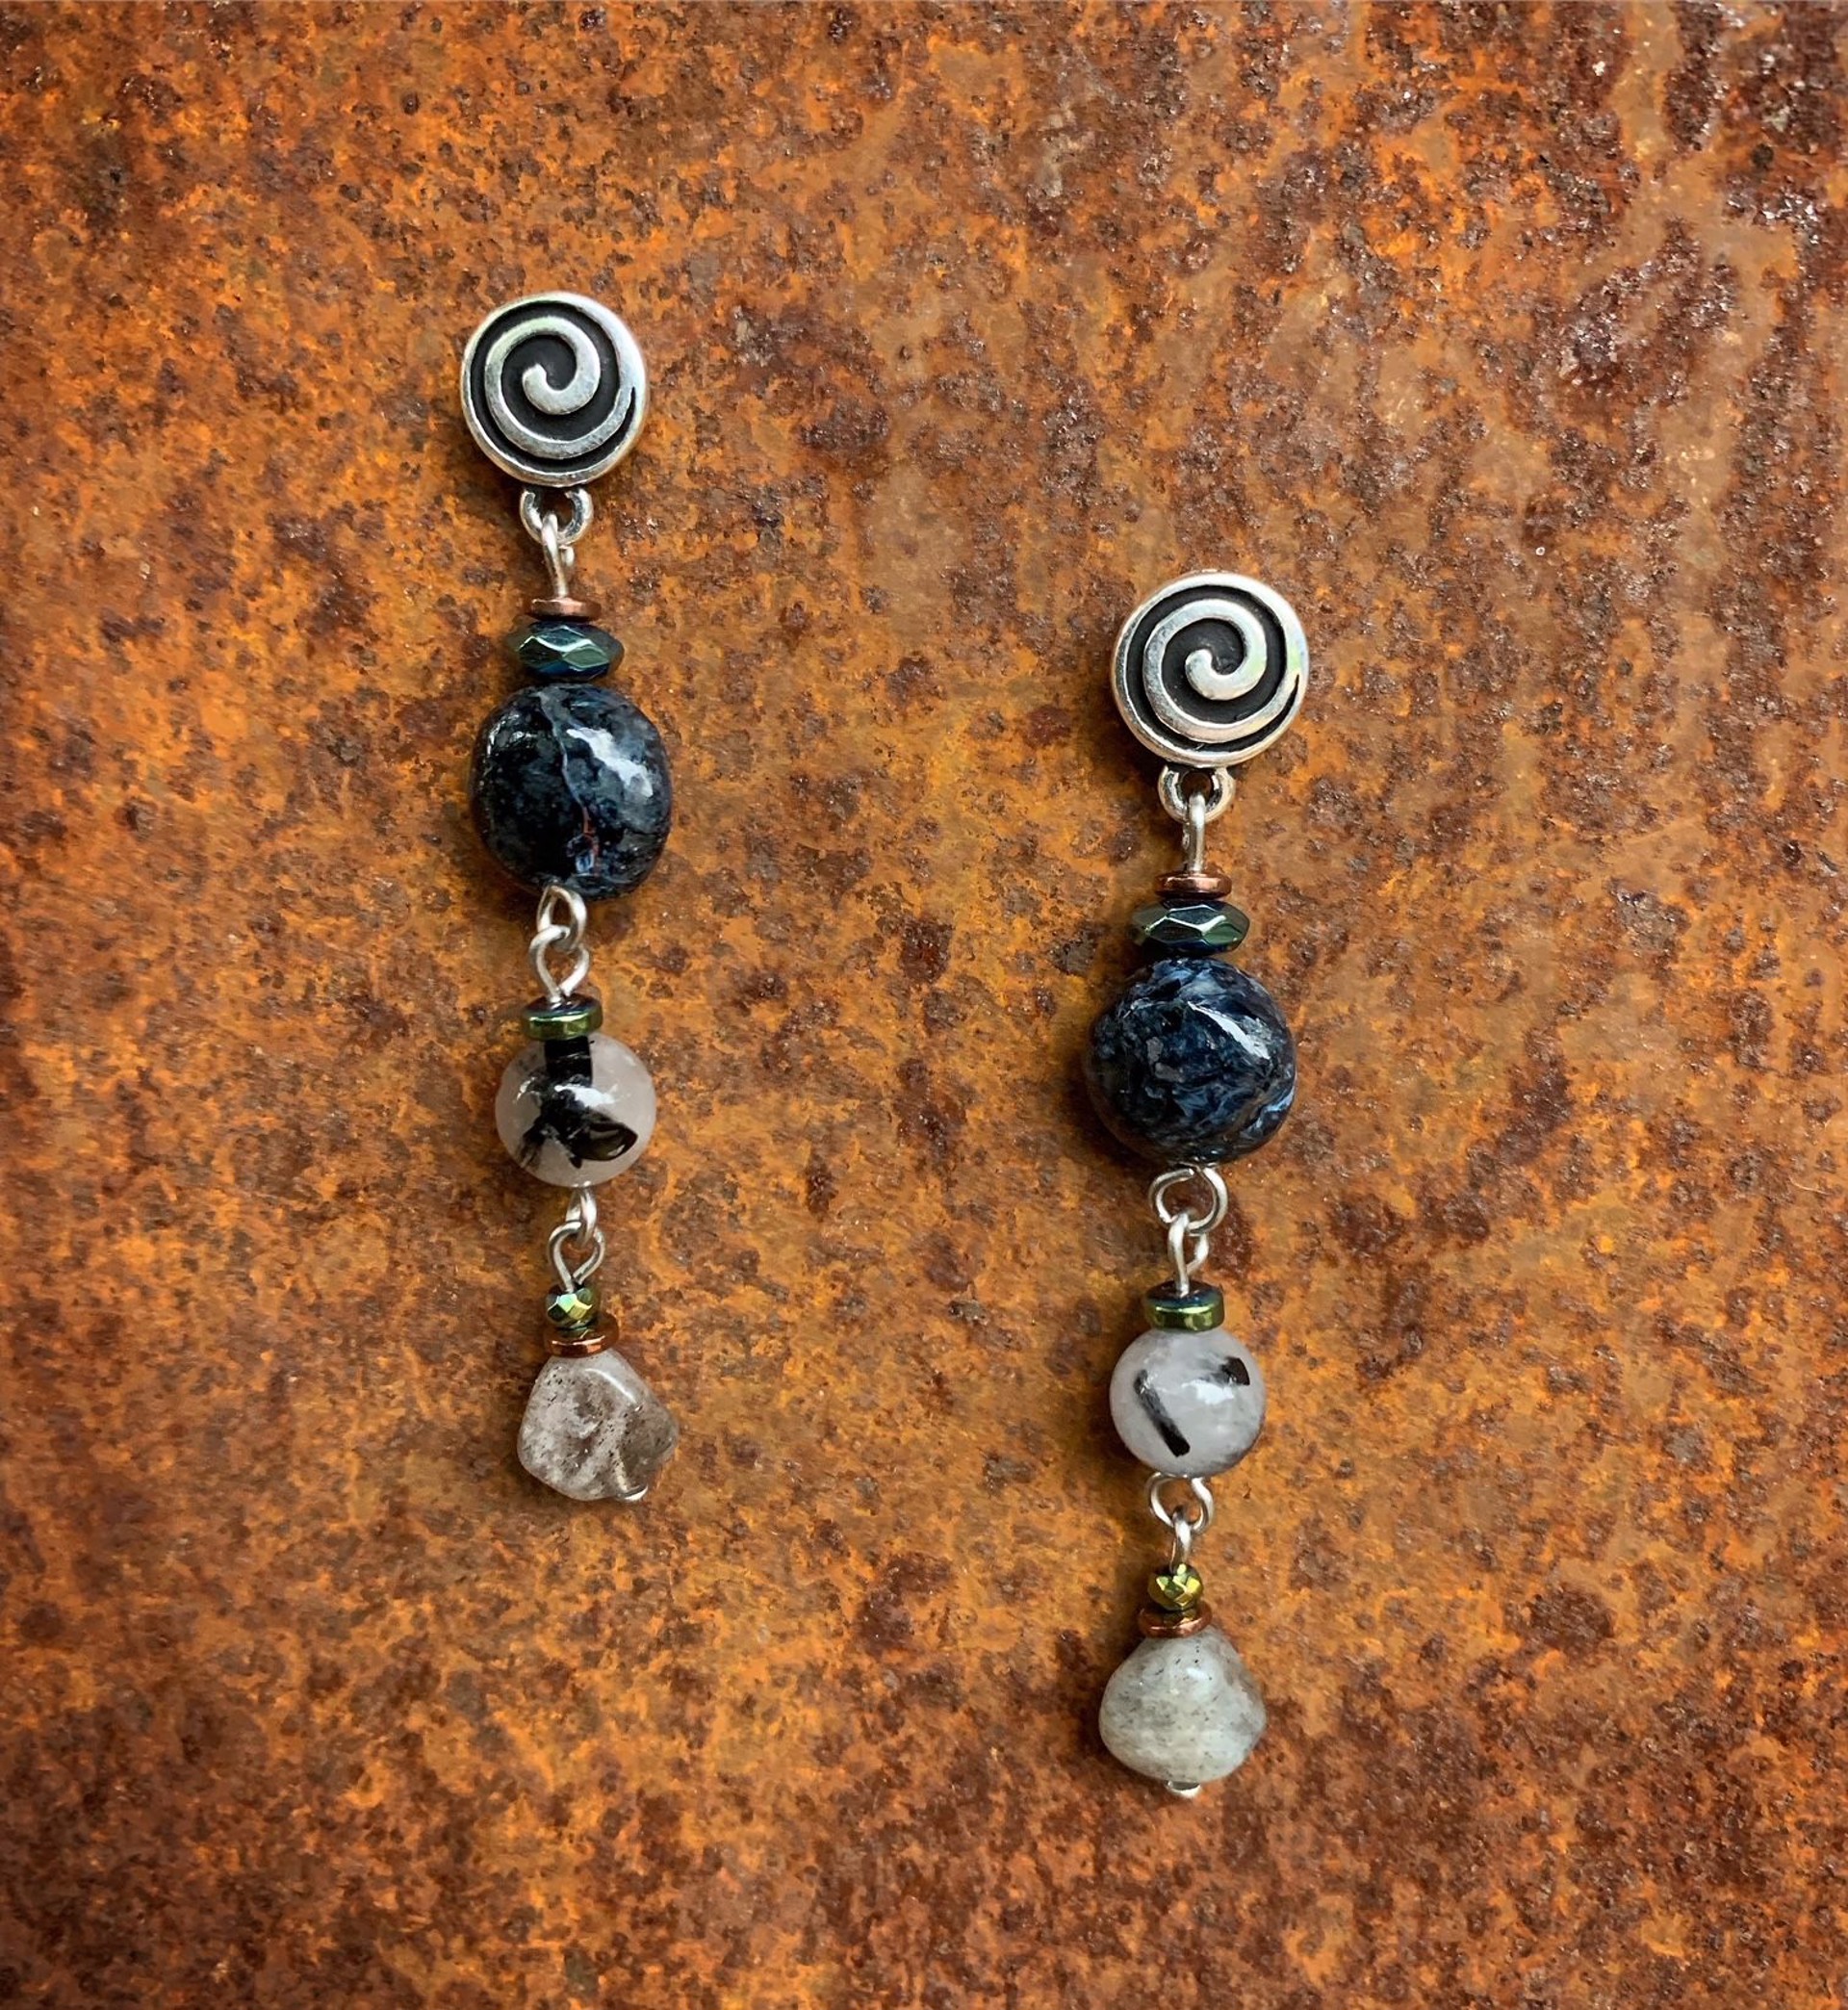 K755 Rutilated Quartz and Lava Earrings by Kelly Ormsby